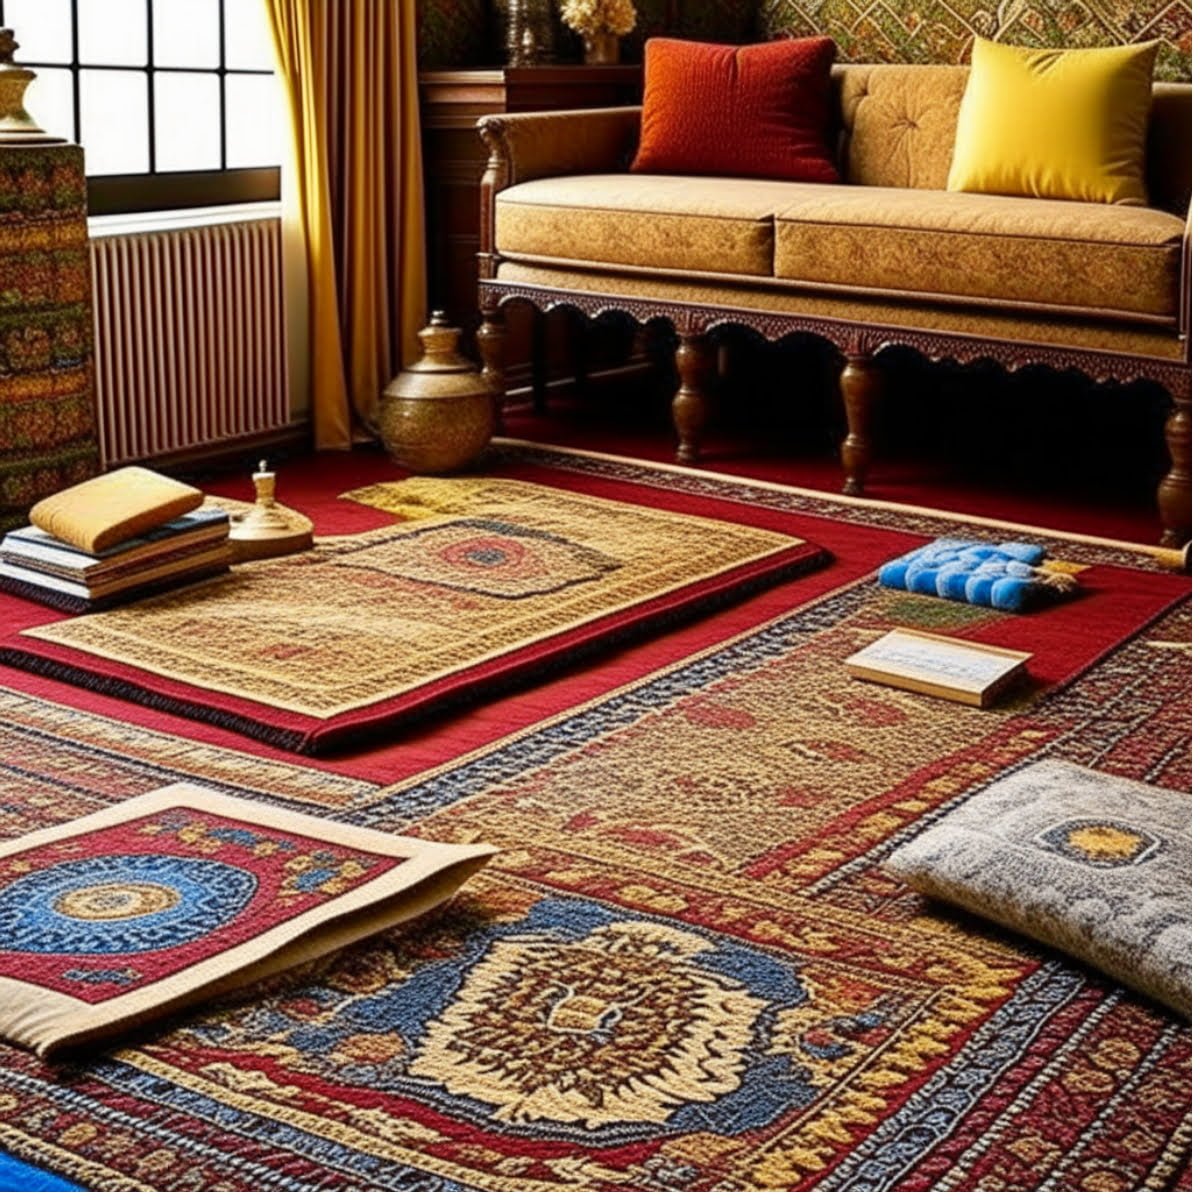 Magical harry potter rugs and throws